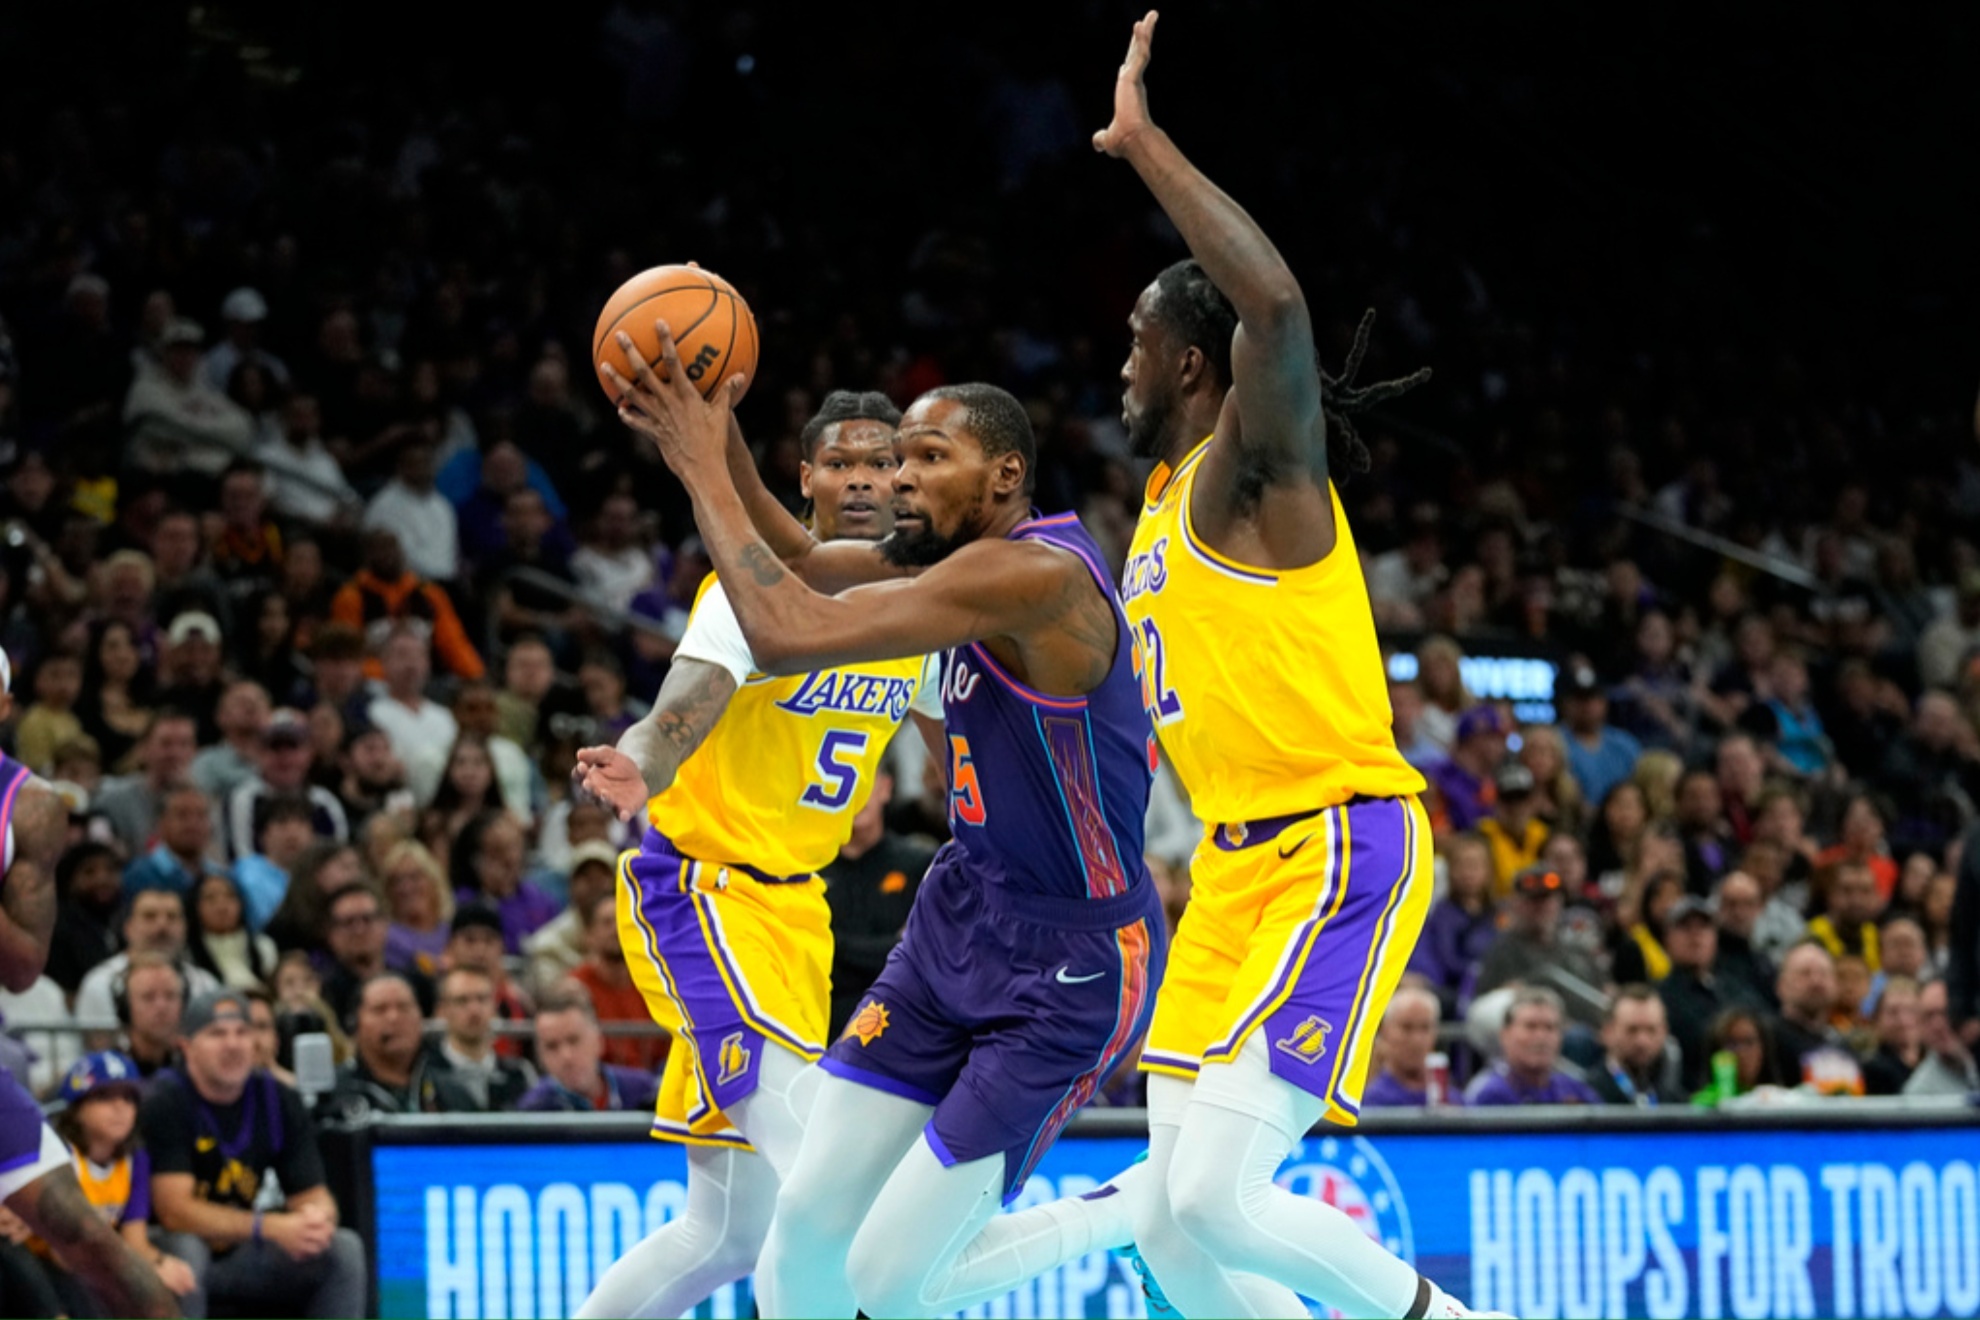 The Suns will look to advance to the In-Season Tournament semifinals on Tuesday against the Lakers